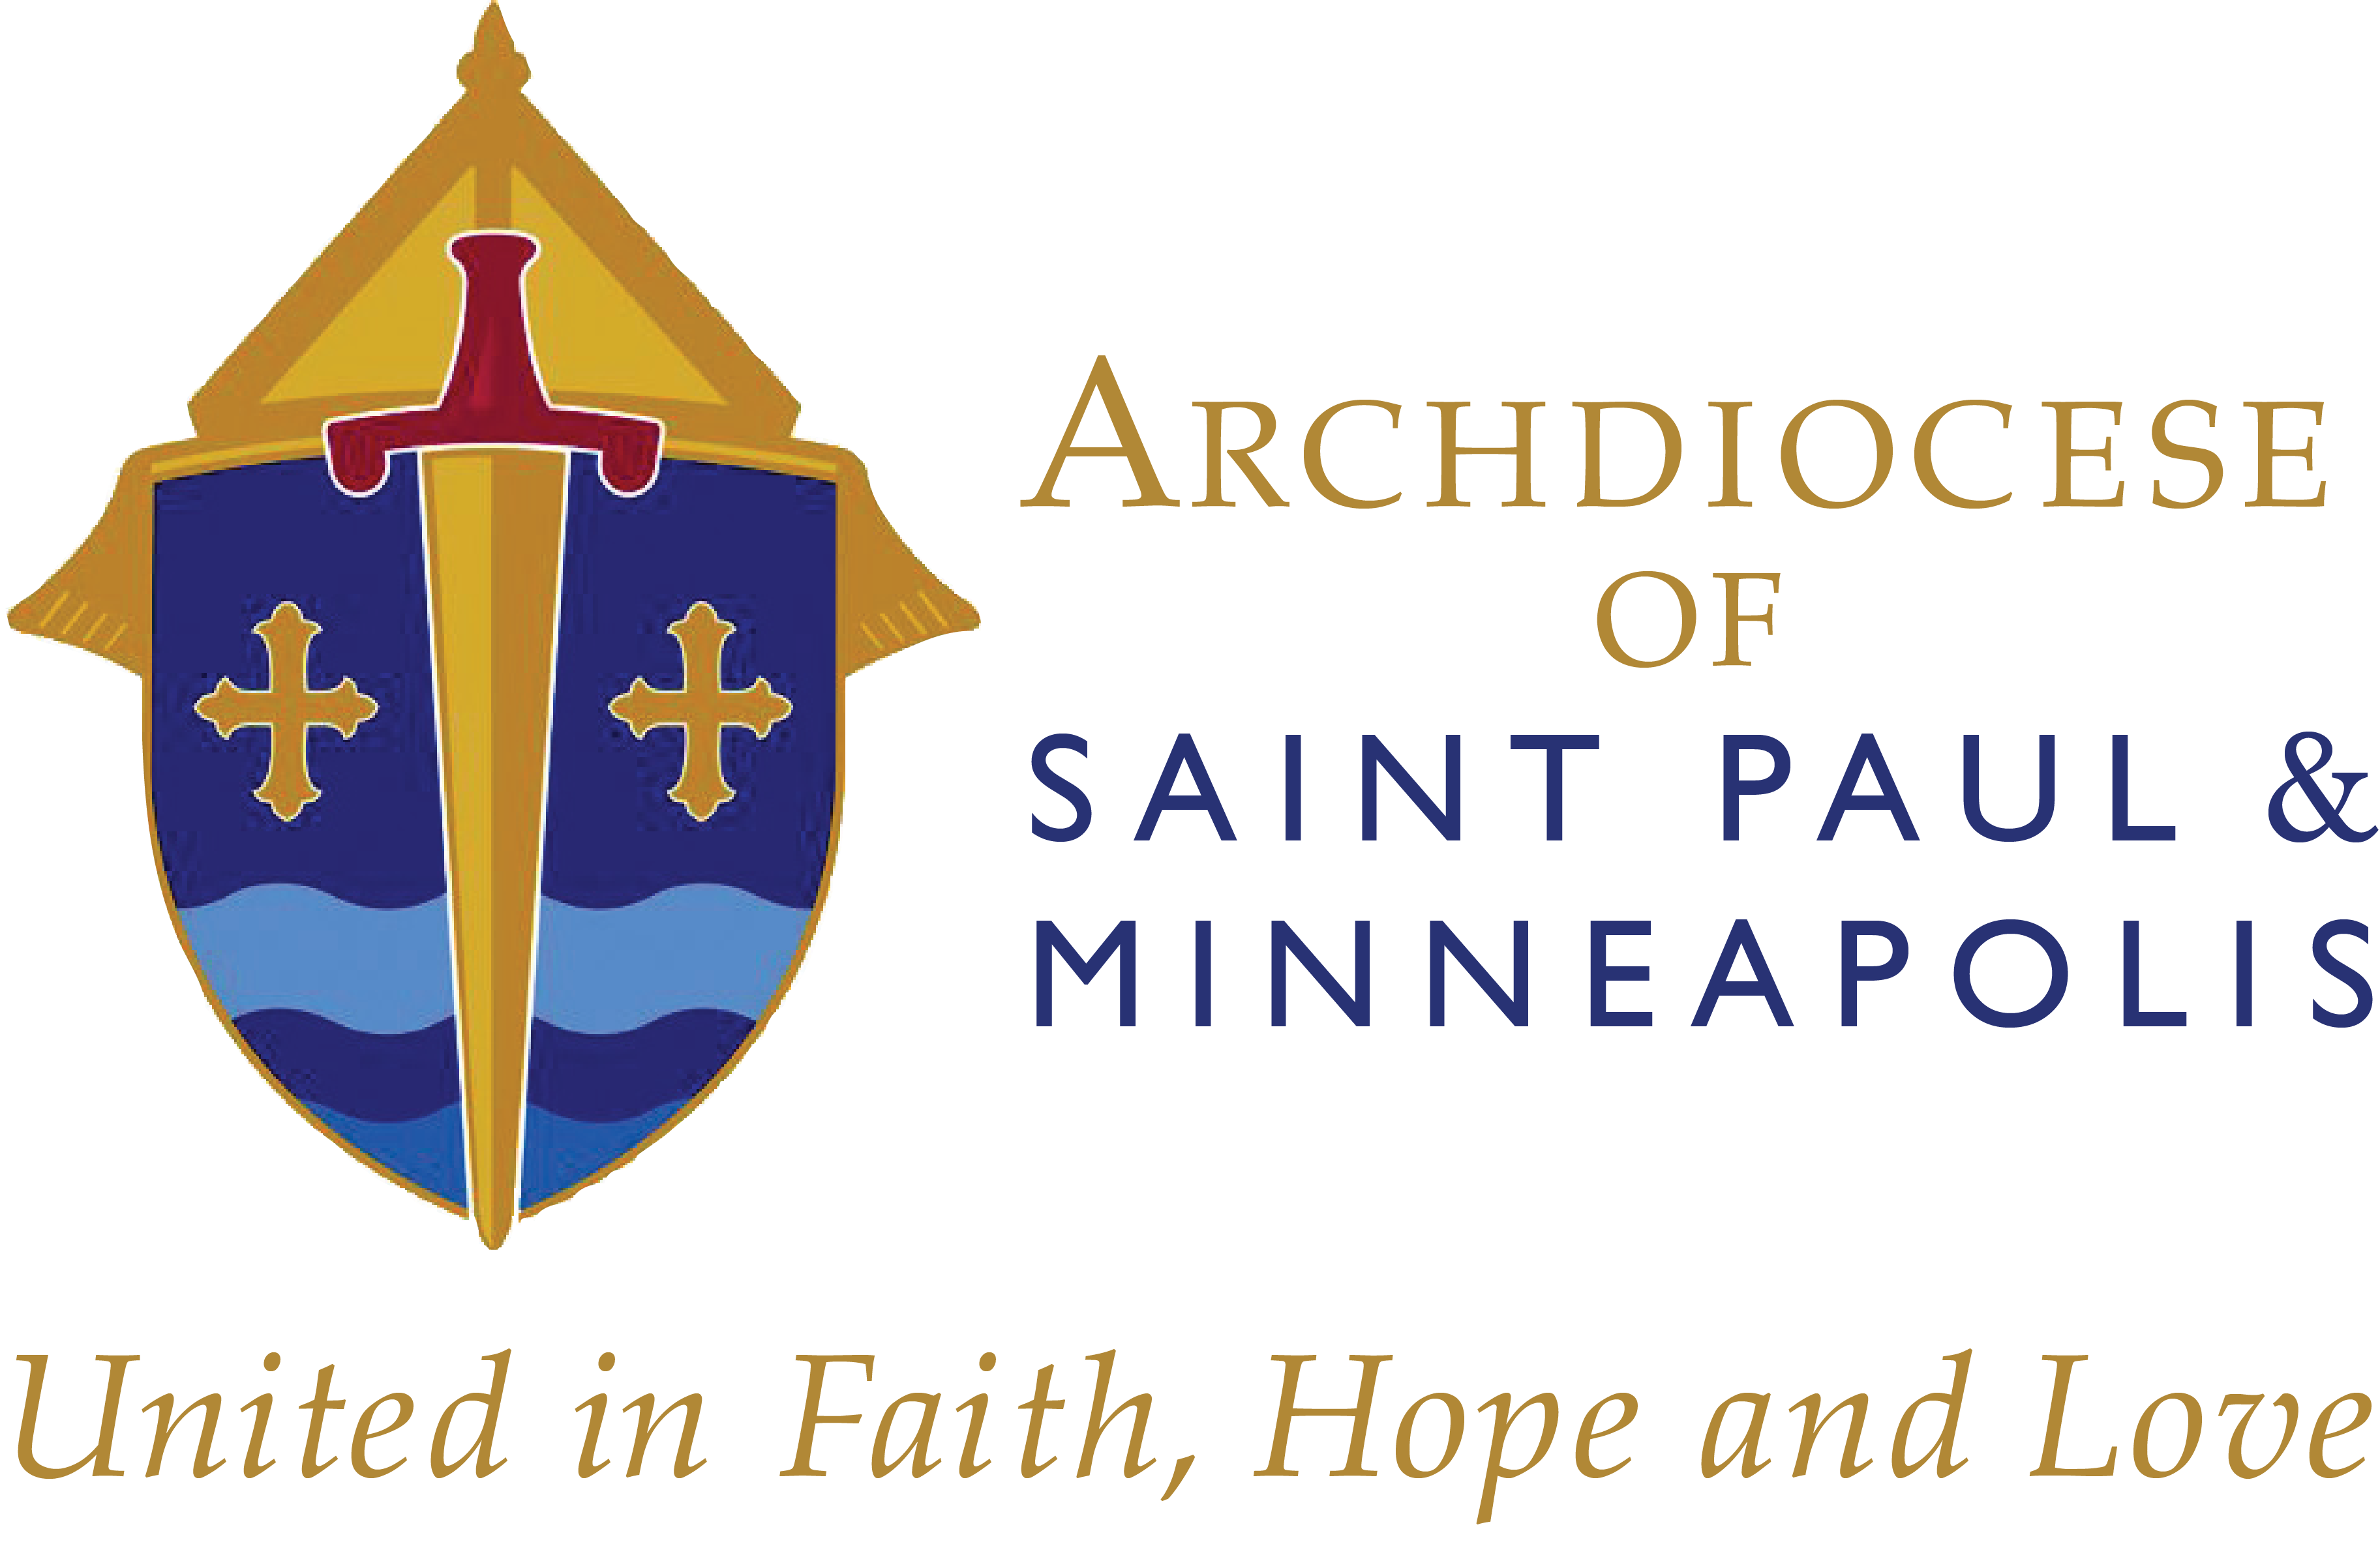 Archdiocese of St. Paul Minneapolis